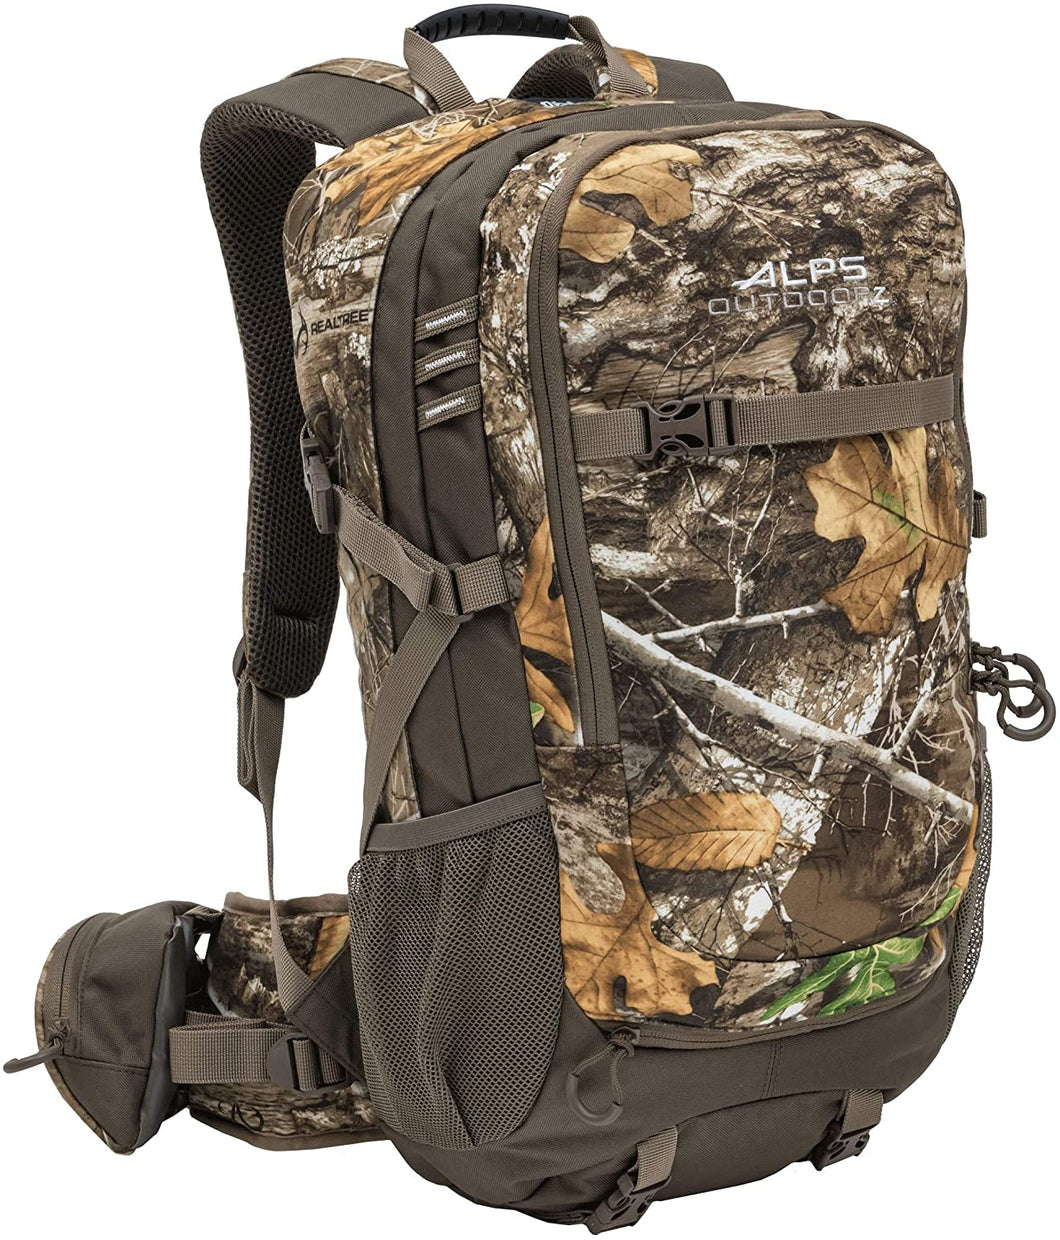 ALPS OutdoorZ Huntress Hunting Pack - AL9413100